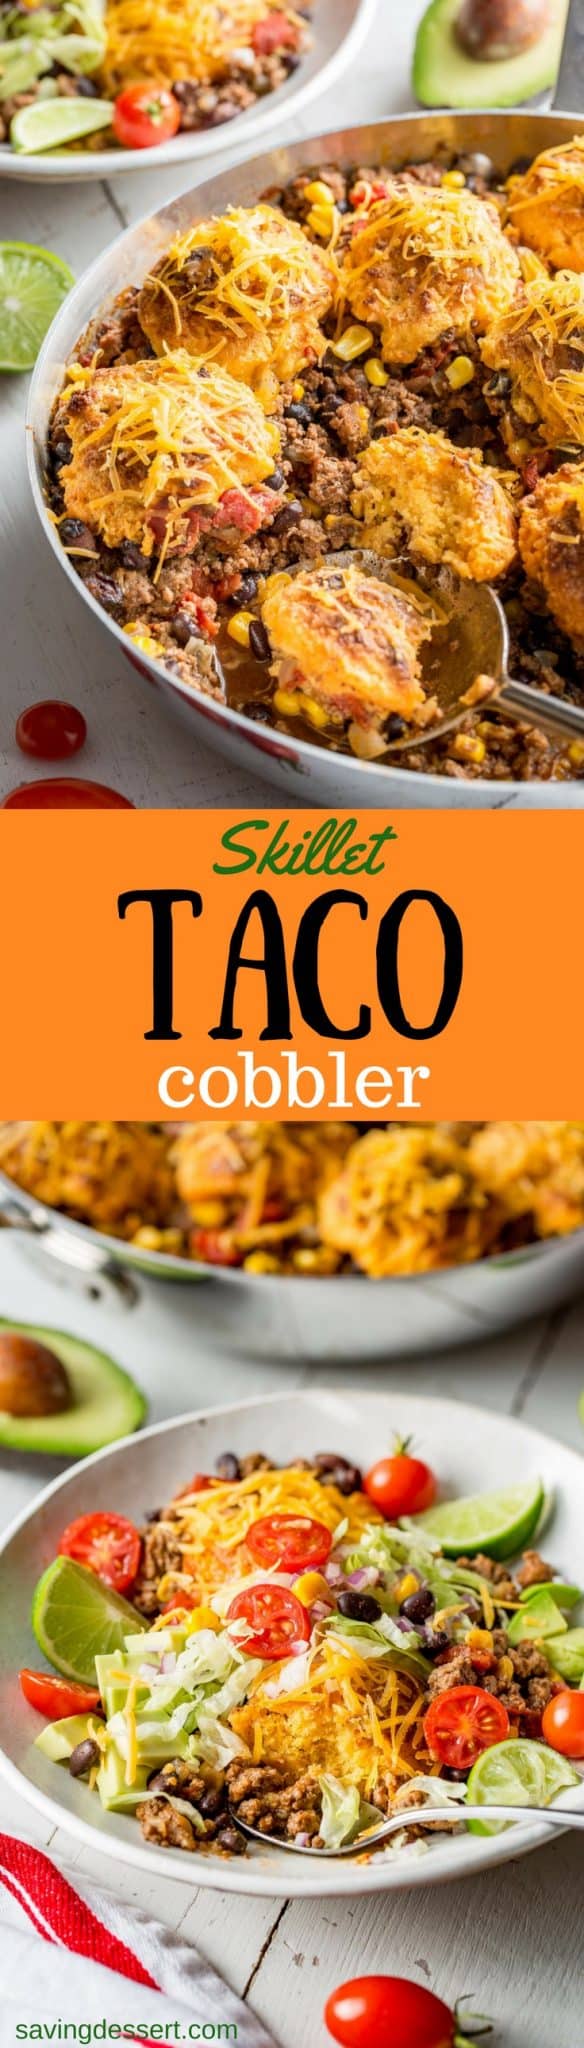 Skillet Taco Cobbler ~ ground beef, black beans, tomatoes and corn come together in a nicely spiced base for our tender, cheesy cornmeal biscuits. www.savingdessert.com #savingroomfordessert #cobbler #taco #tacocobbler #cornmealbiscuits